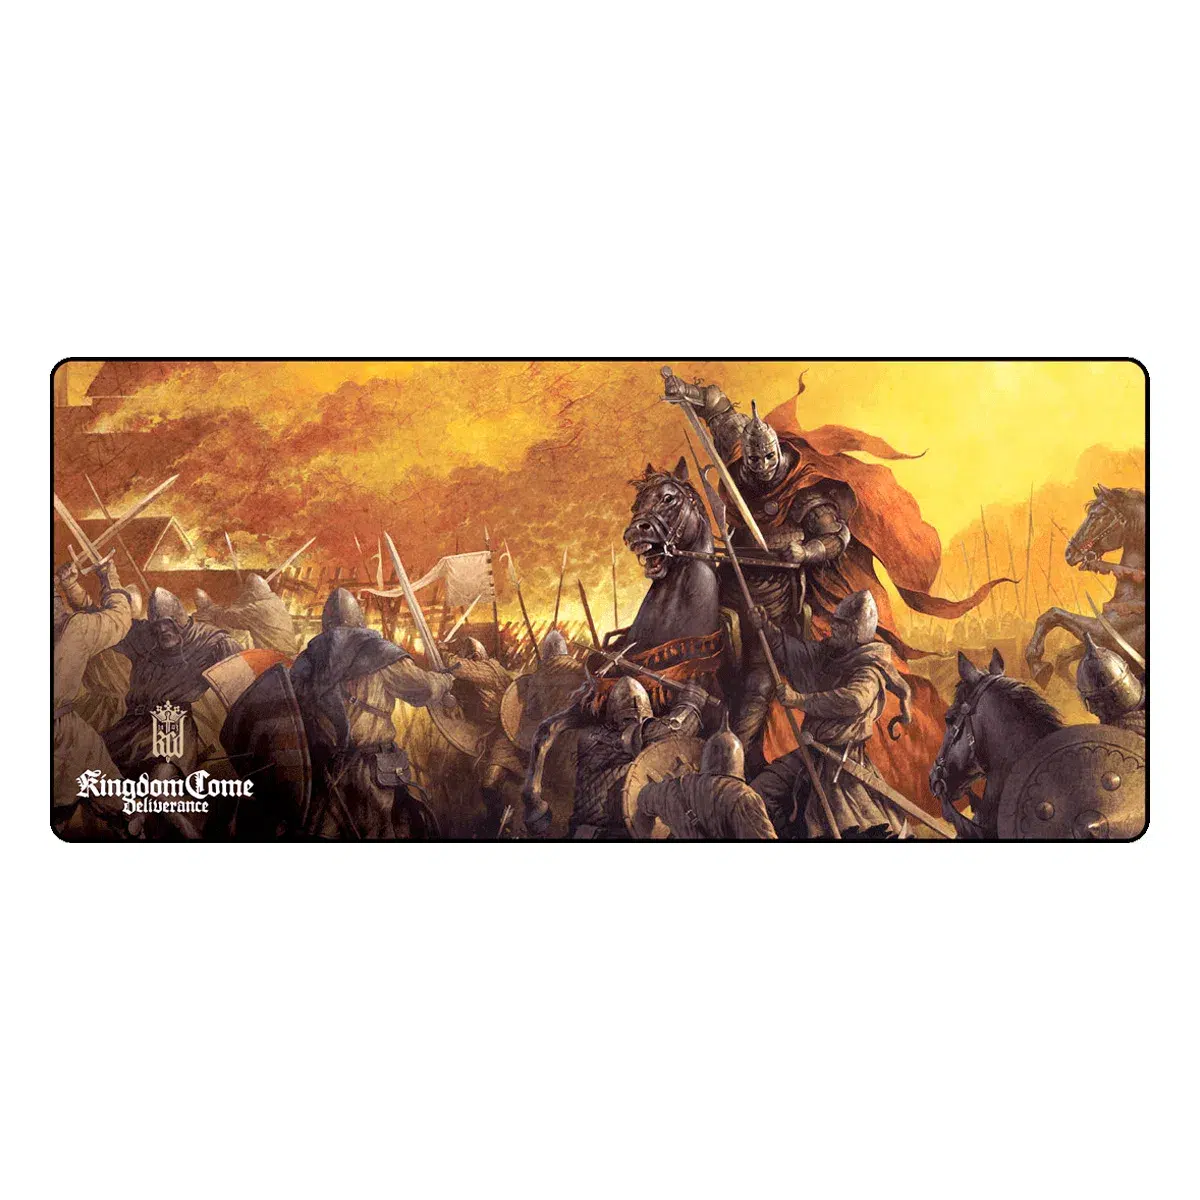 KCD Mousepad "Fighting Knight"